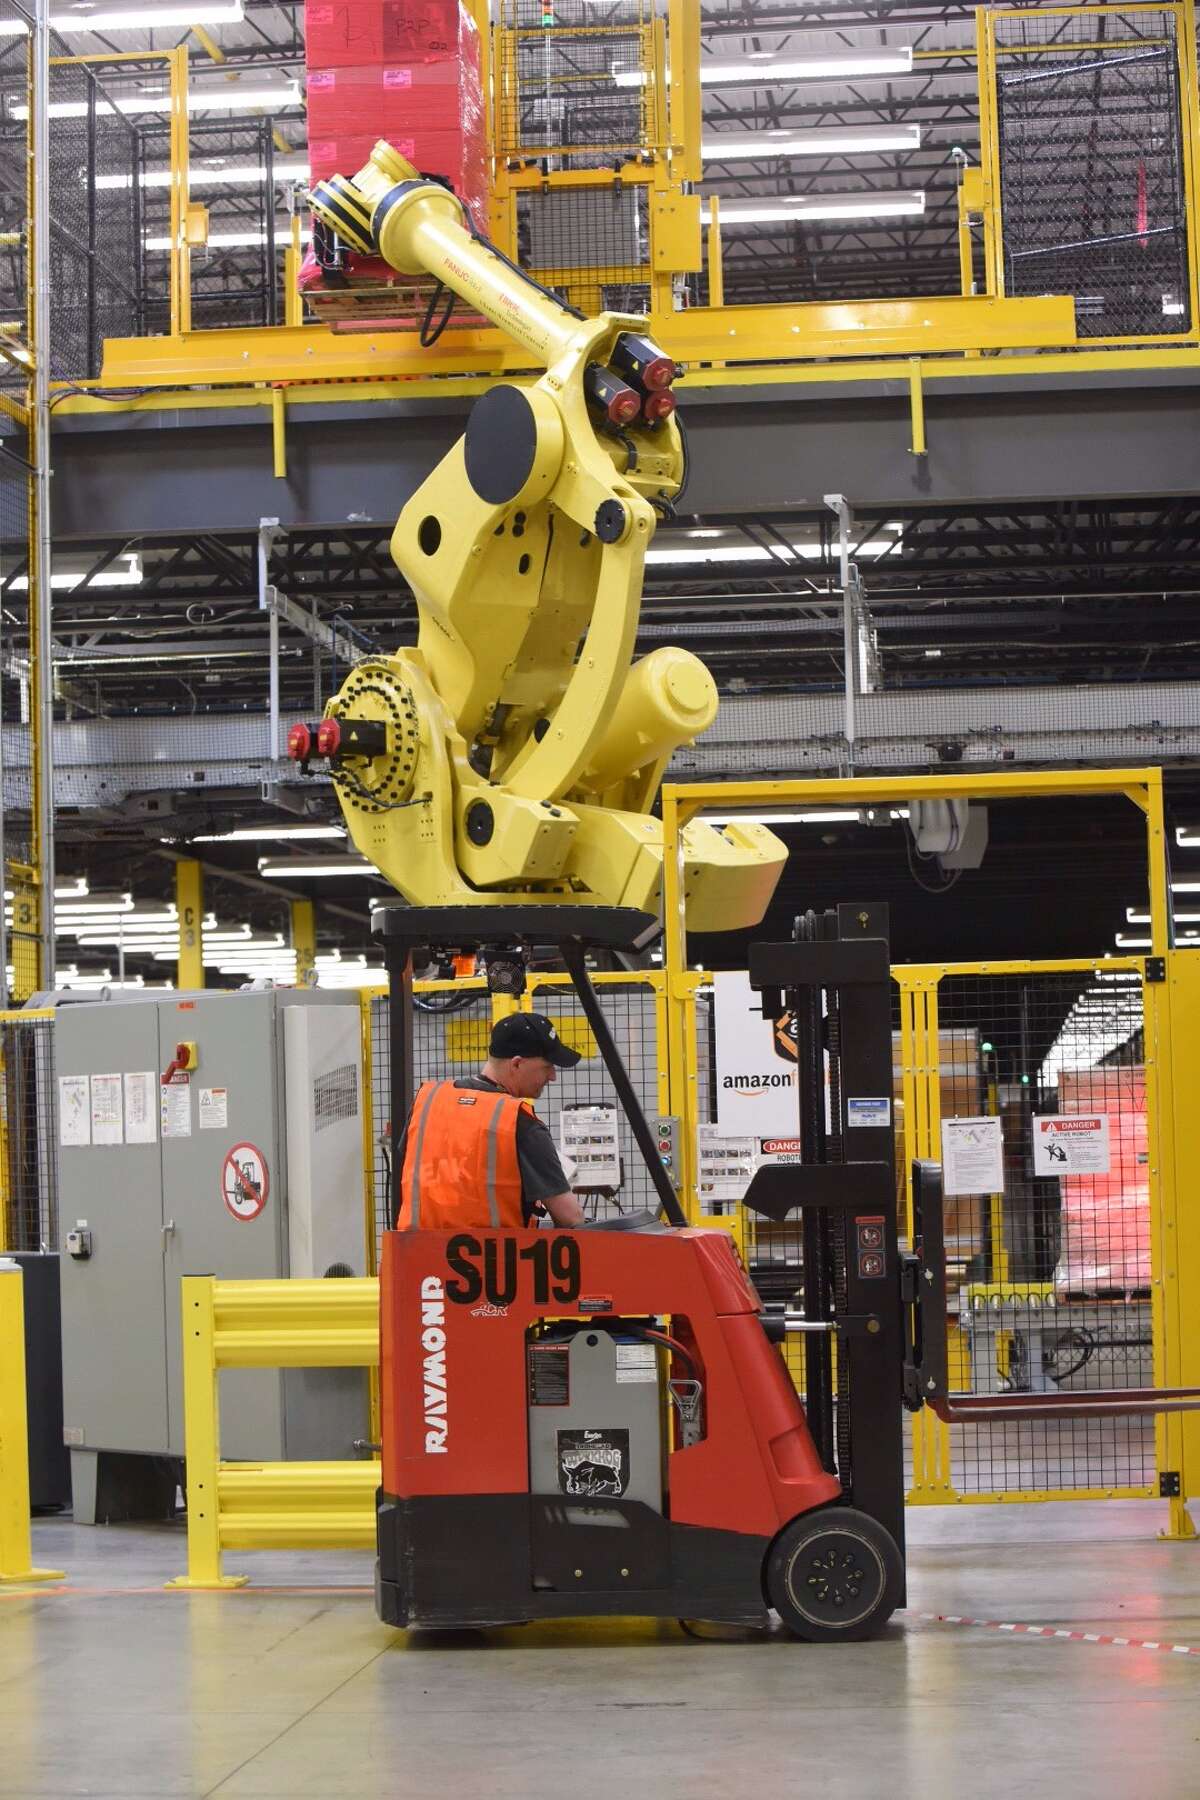 An Amazon employee works by a large robotic arm at the new Amazon Fulfillment Center in Schertz, Texas, on Friday, April 17, 2015.